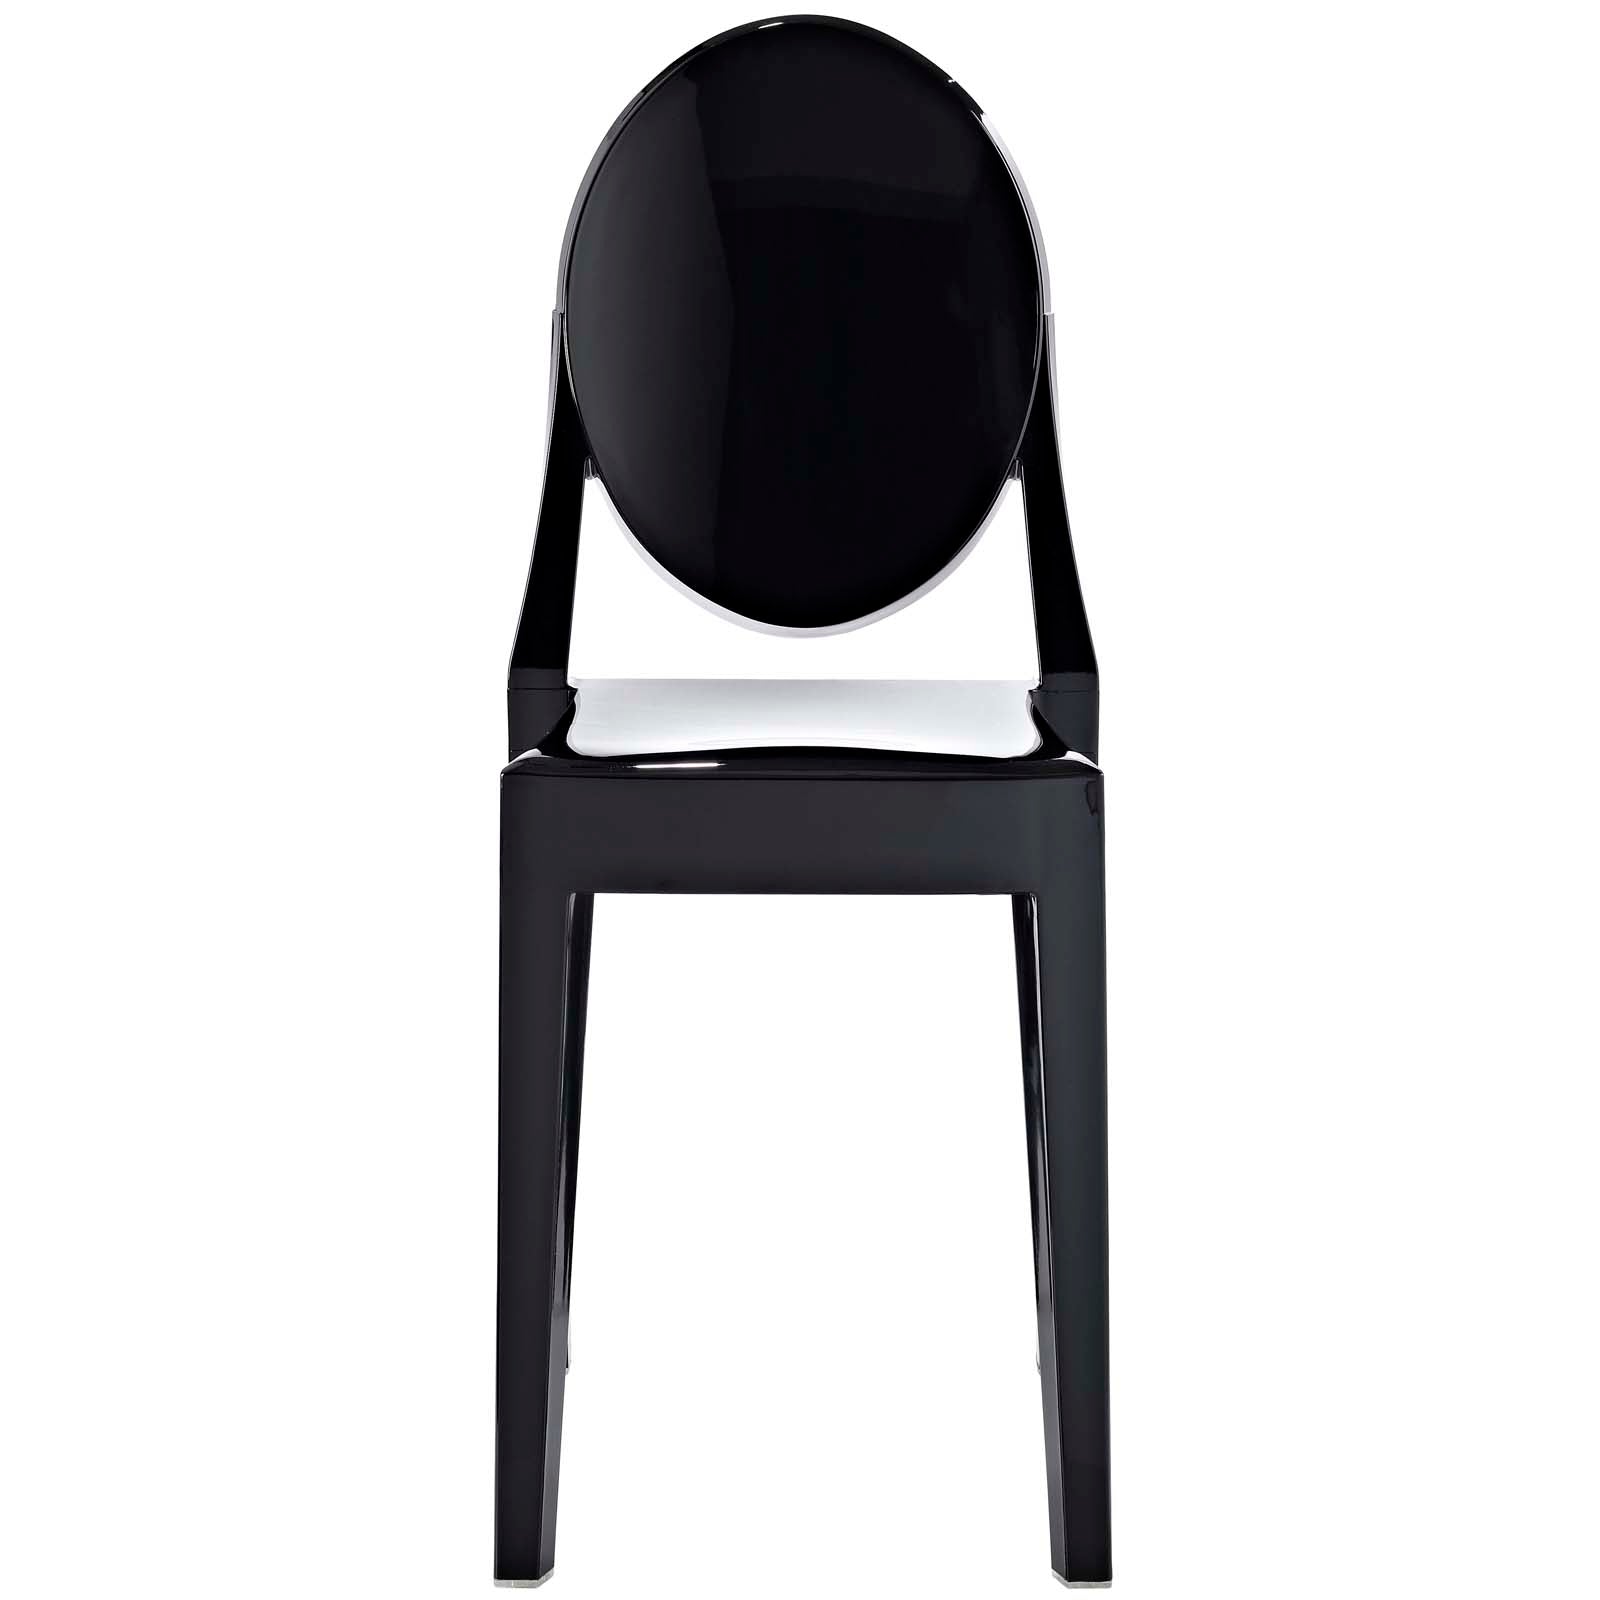 Modway Dining Chairs - Casper Dining Side Chair Black